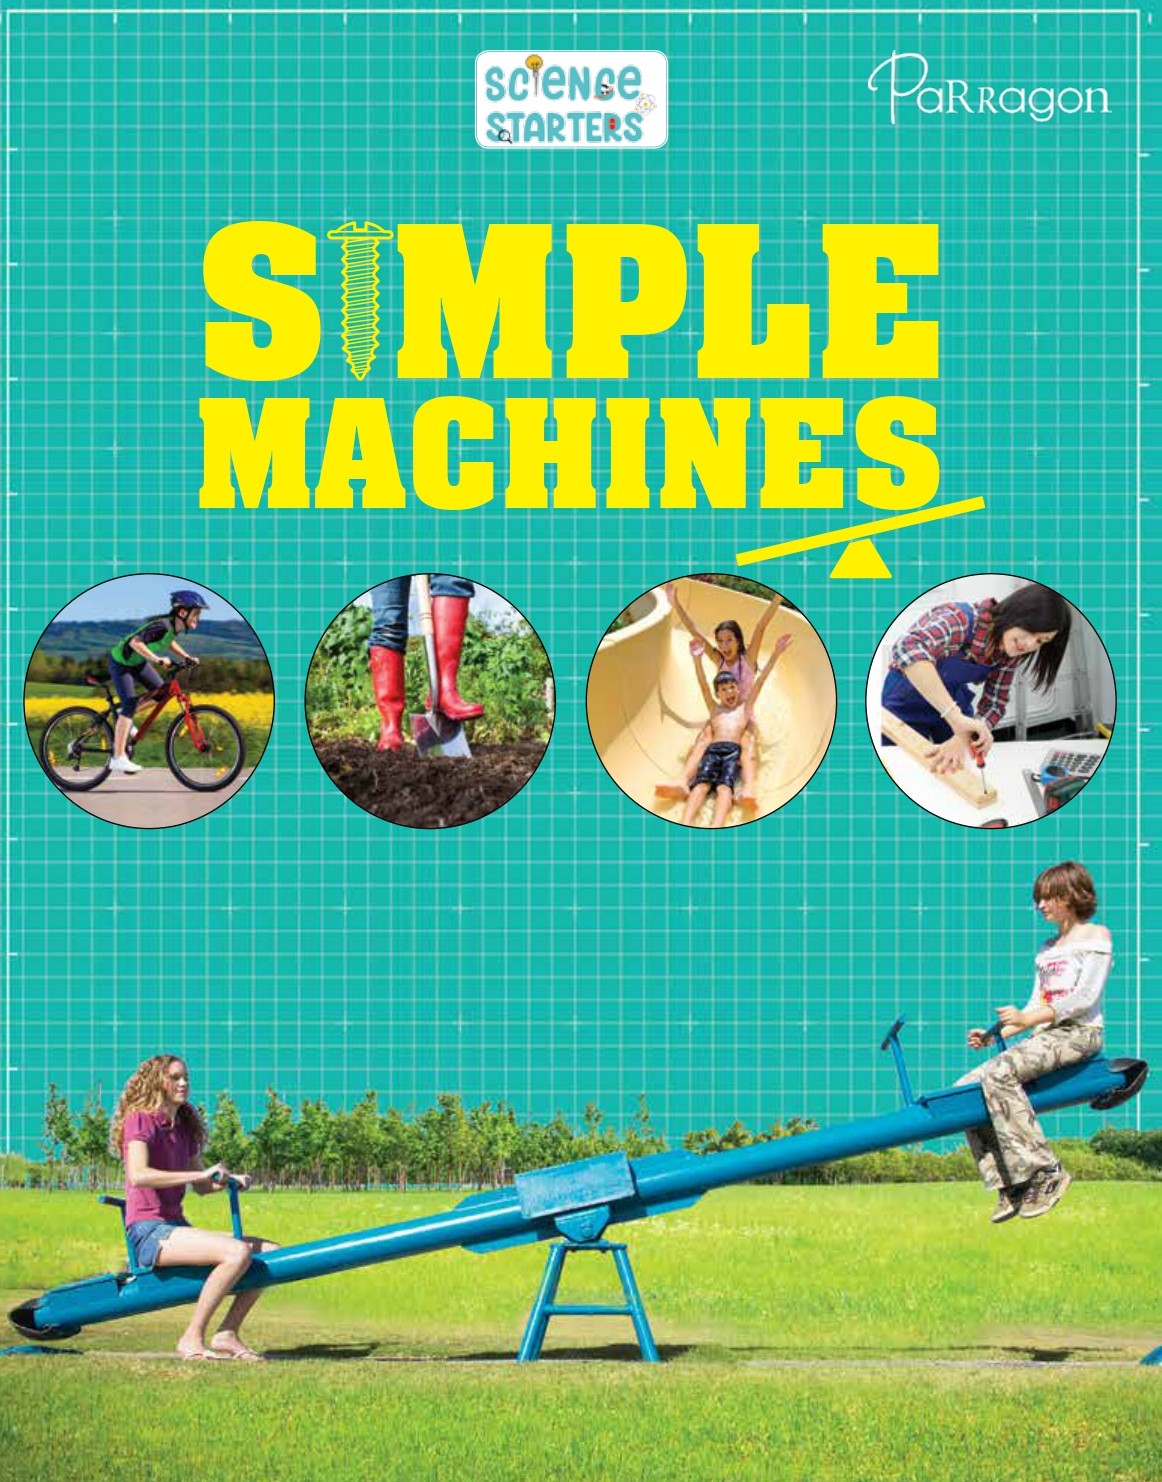 Science Starters: Simple Machines Reference Book [Paperback] Parragon